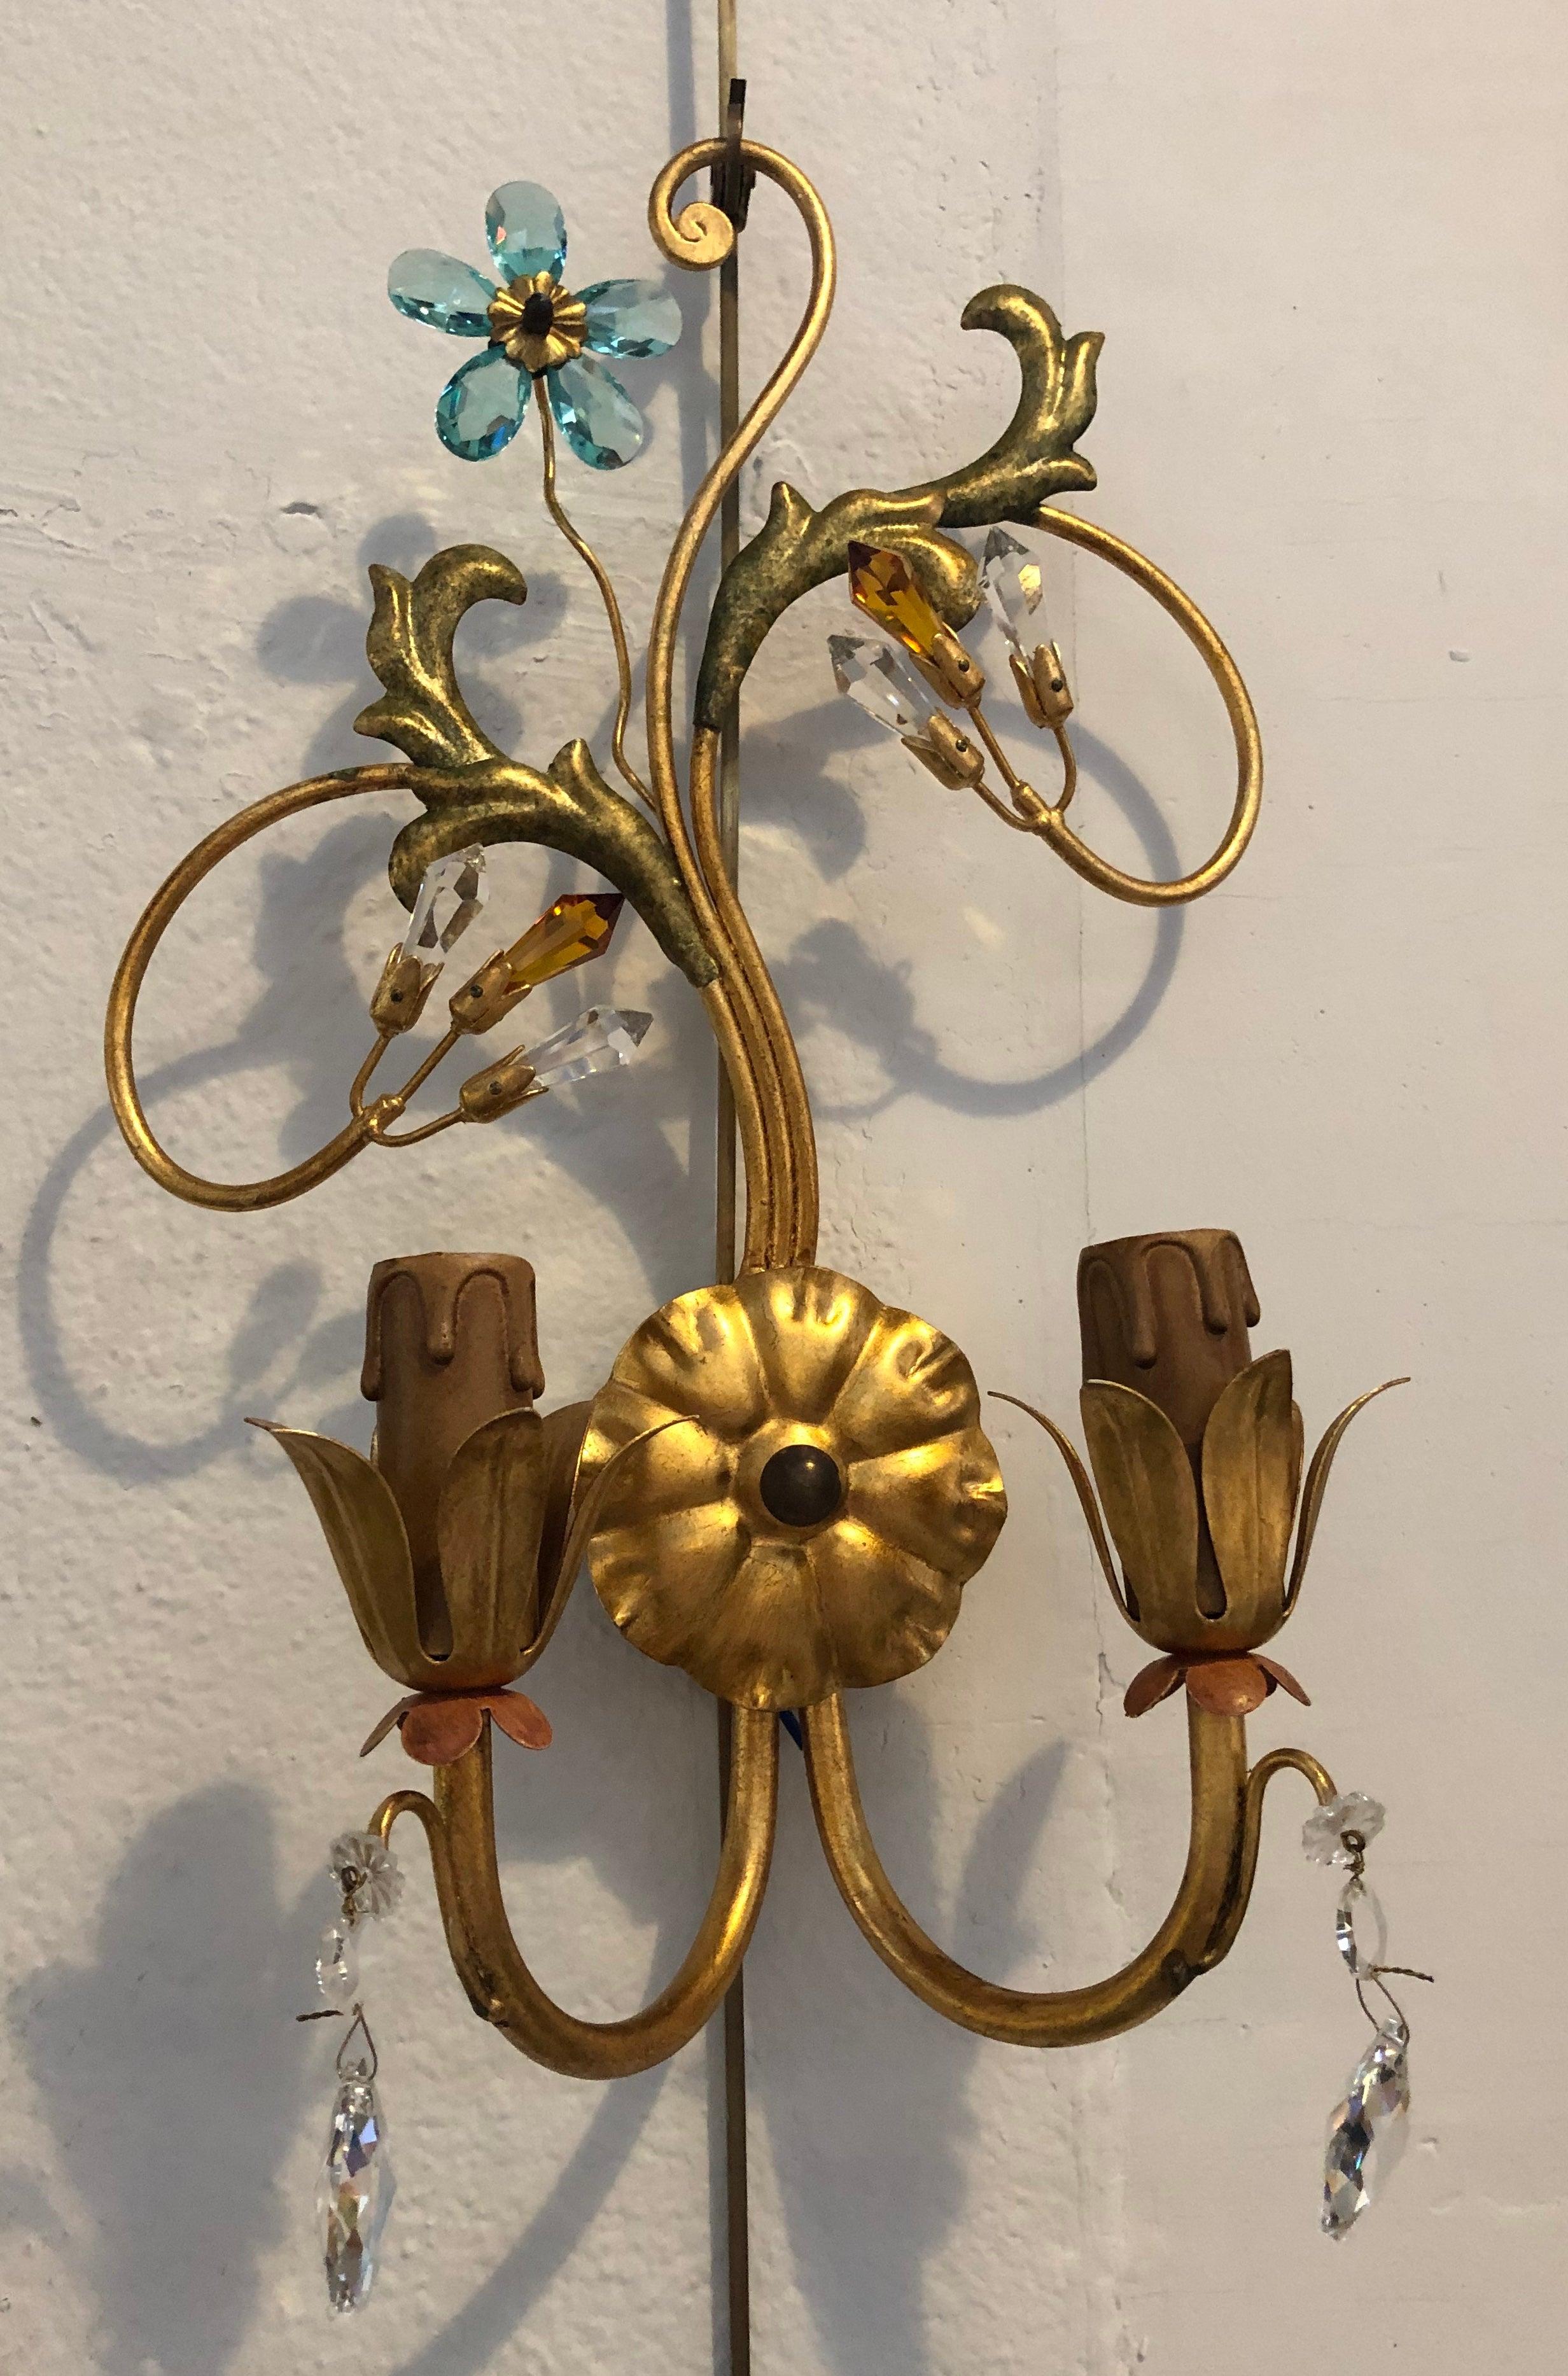 20th Century Pair of Neoclassical Handcrafted Italian Gilt Metal and Crystal Sconces by Alba